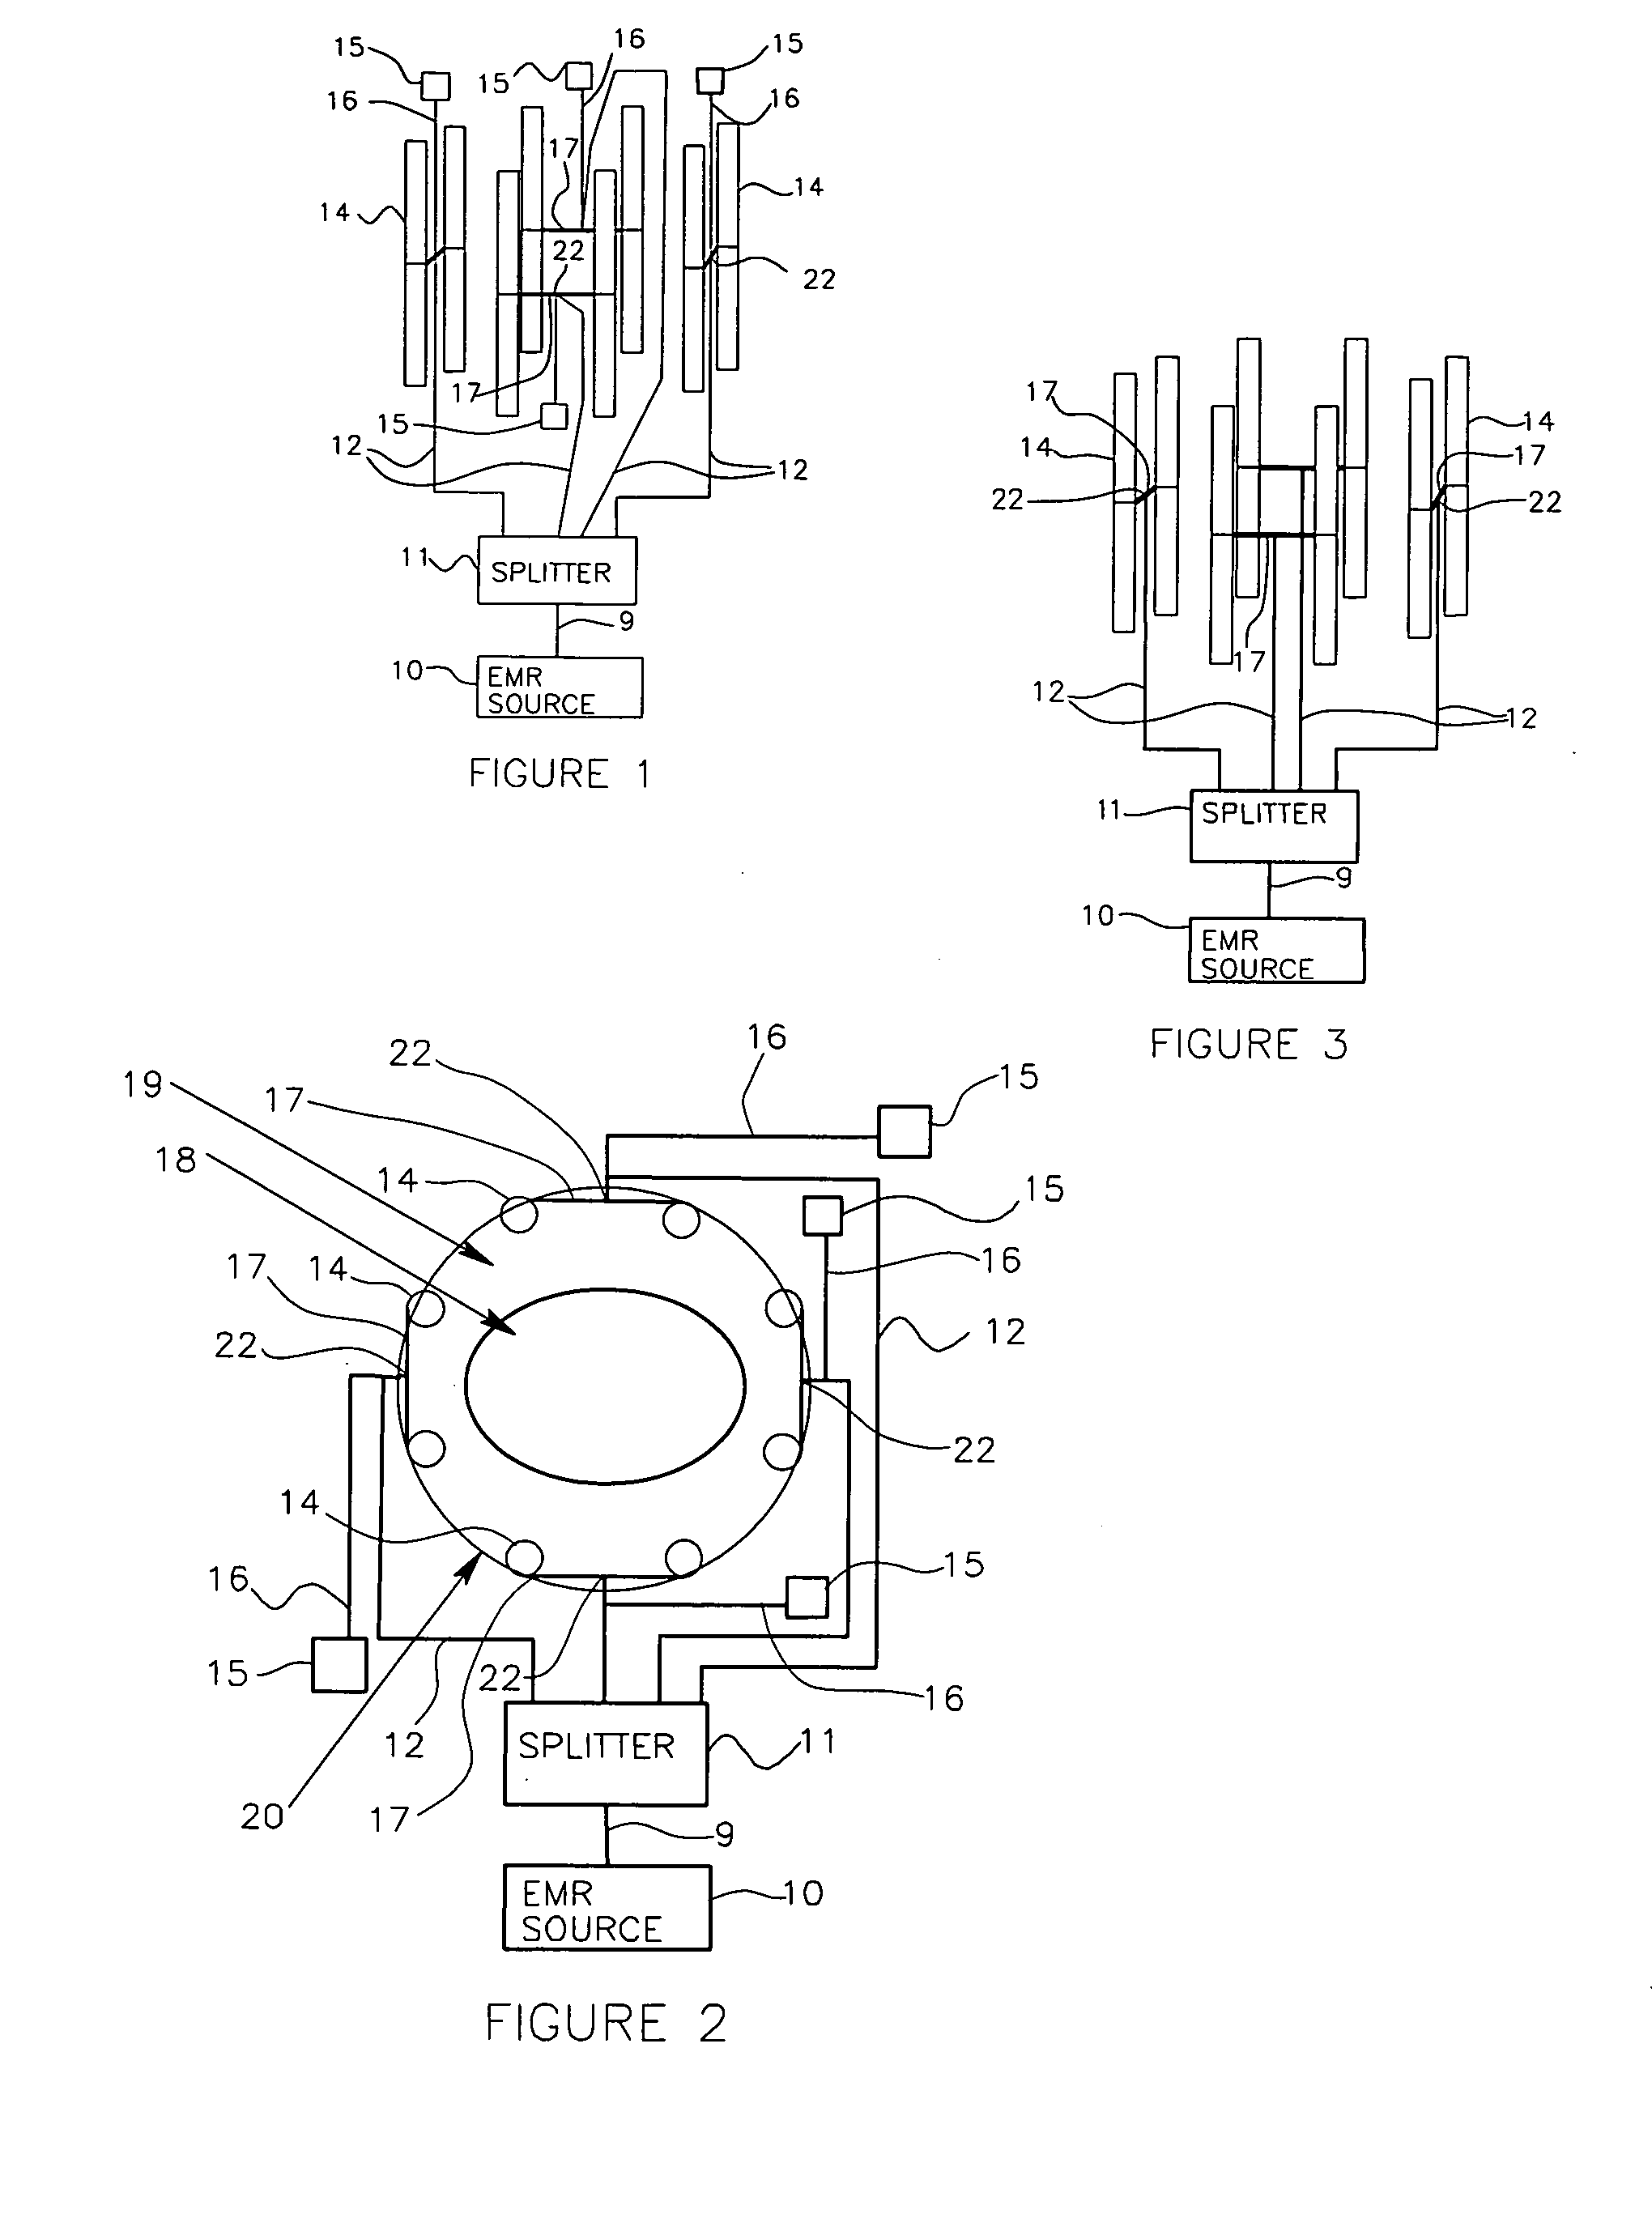 System and method for irradiating a target with electromagnetic radiation to produce a heated region